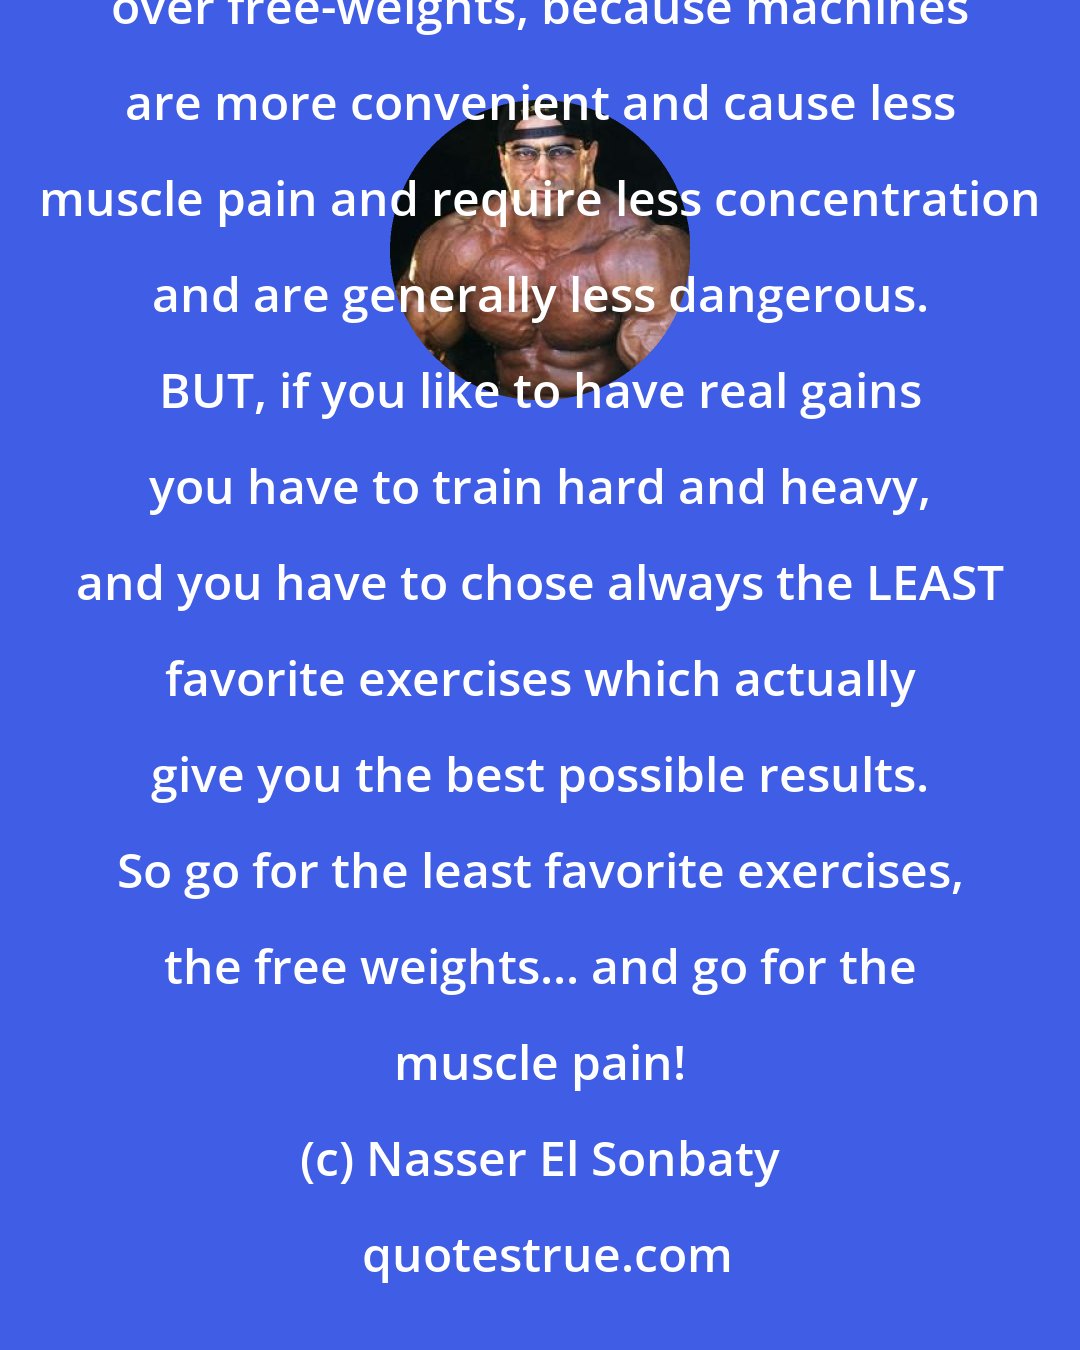 Nasser El Sonbaty: I don't have a favorite body part nor do I have a favorite exercise. Everyone who is honest prefers machines over free-weights, because machines are more convenient and cause less muscle pain and require less concentration and are generally less dangerous. BUT, if you like to have real gains you have to train hard and heavy, and you have to chose always the LEAST favorite exercises which actually give you the best possible results. So go for the least favorite exercises, the free weights... and go for the muscle pain!